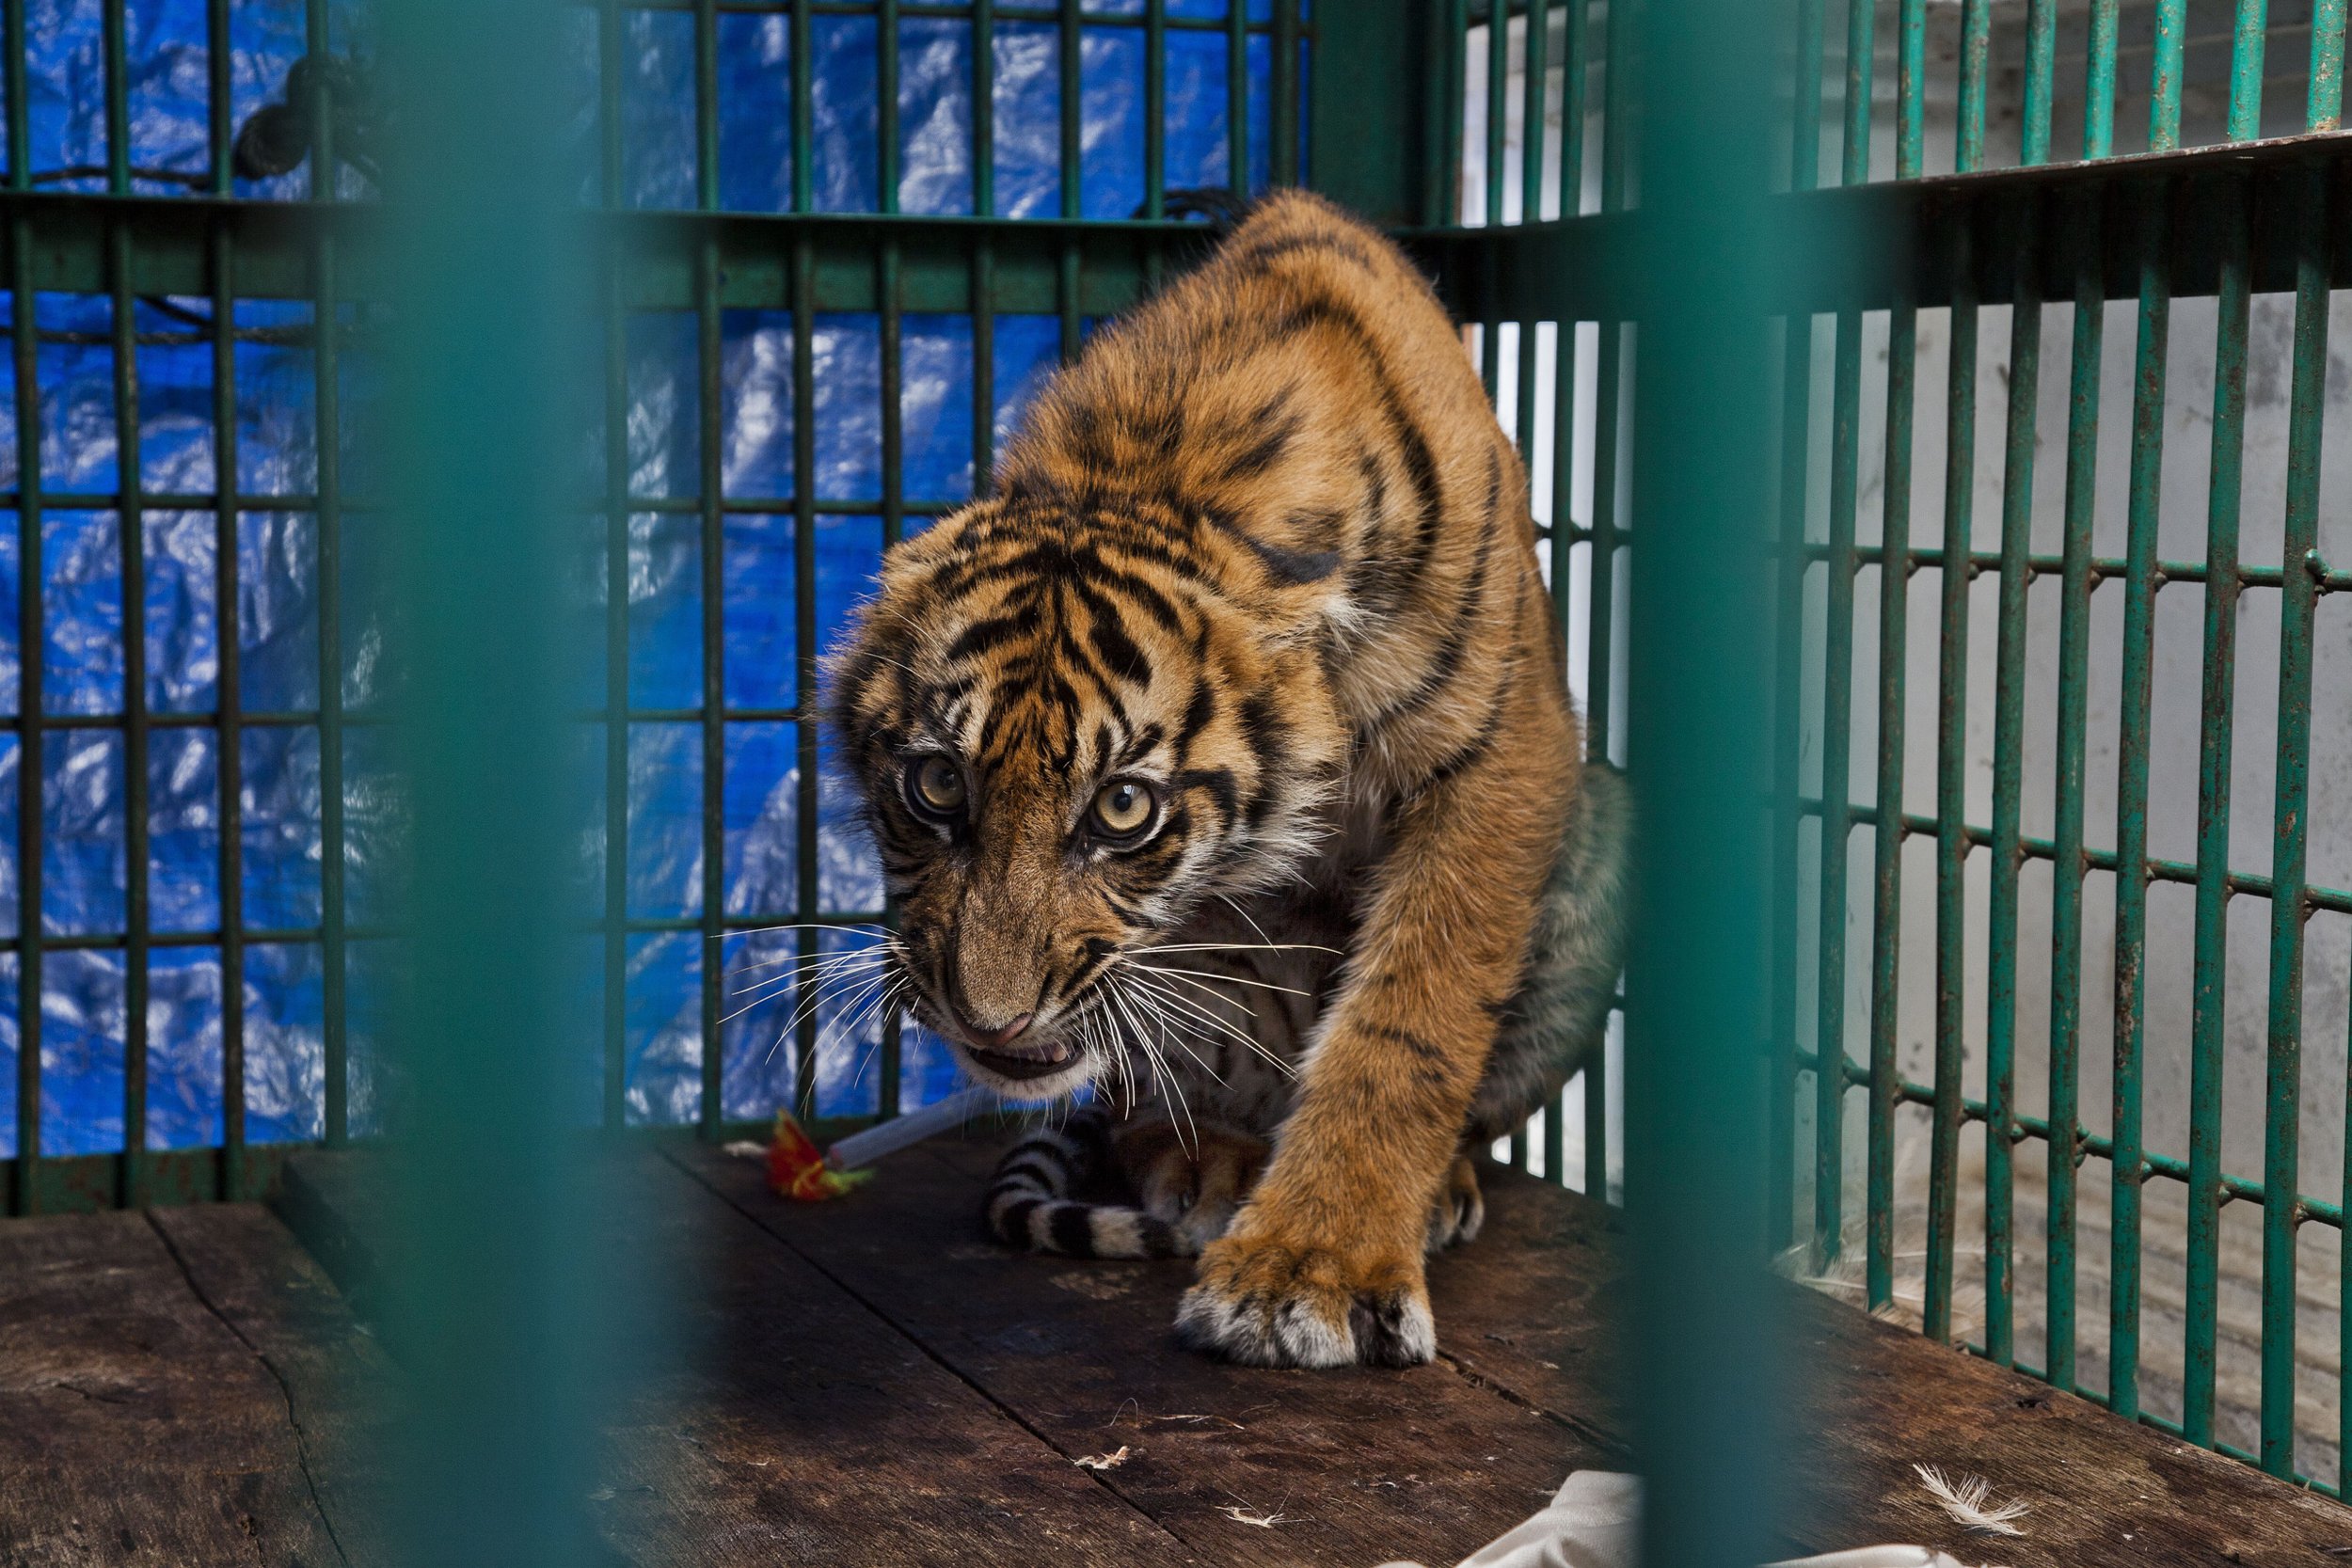 Tiger-cub-in-cage-after-surgery-Sumatra_CR-Steve-Winter-scaled.jpeg